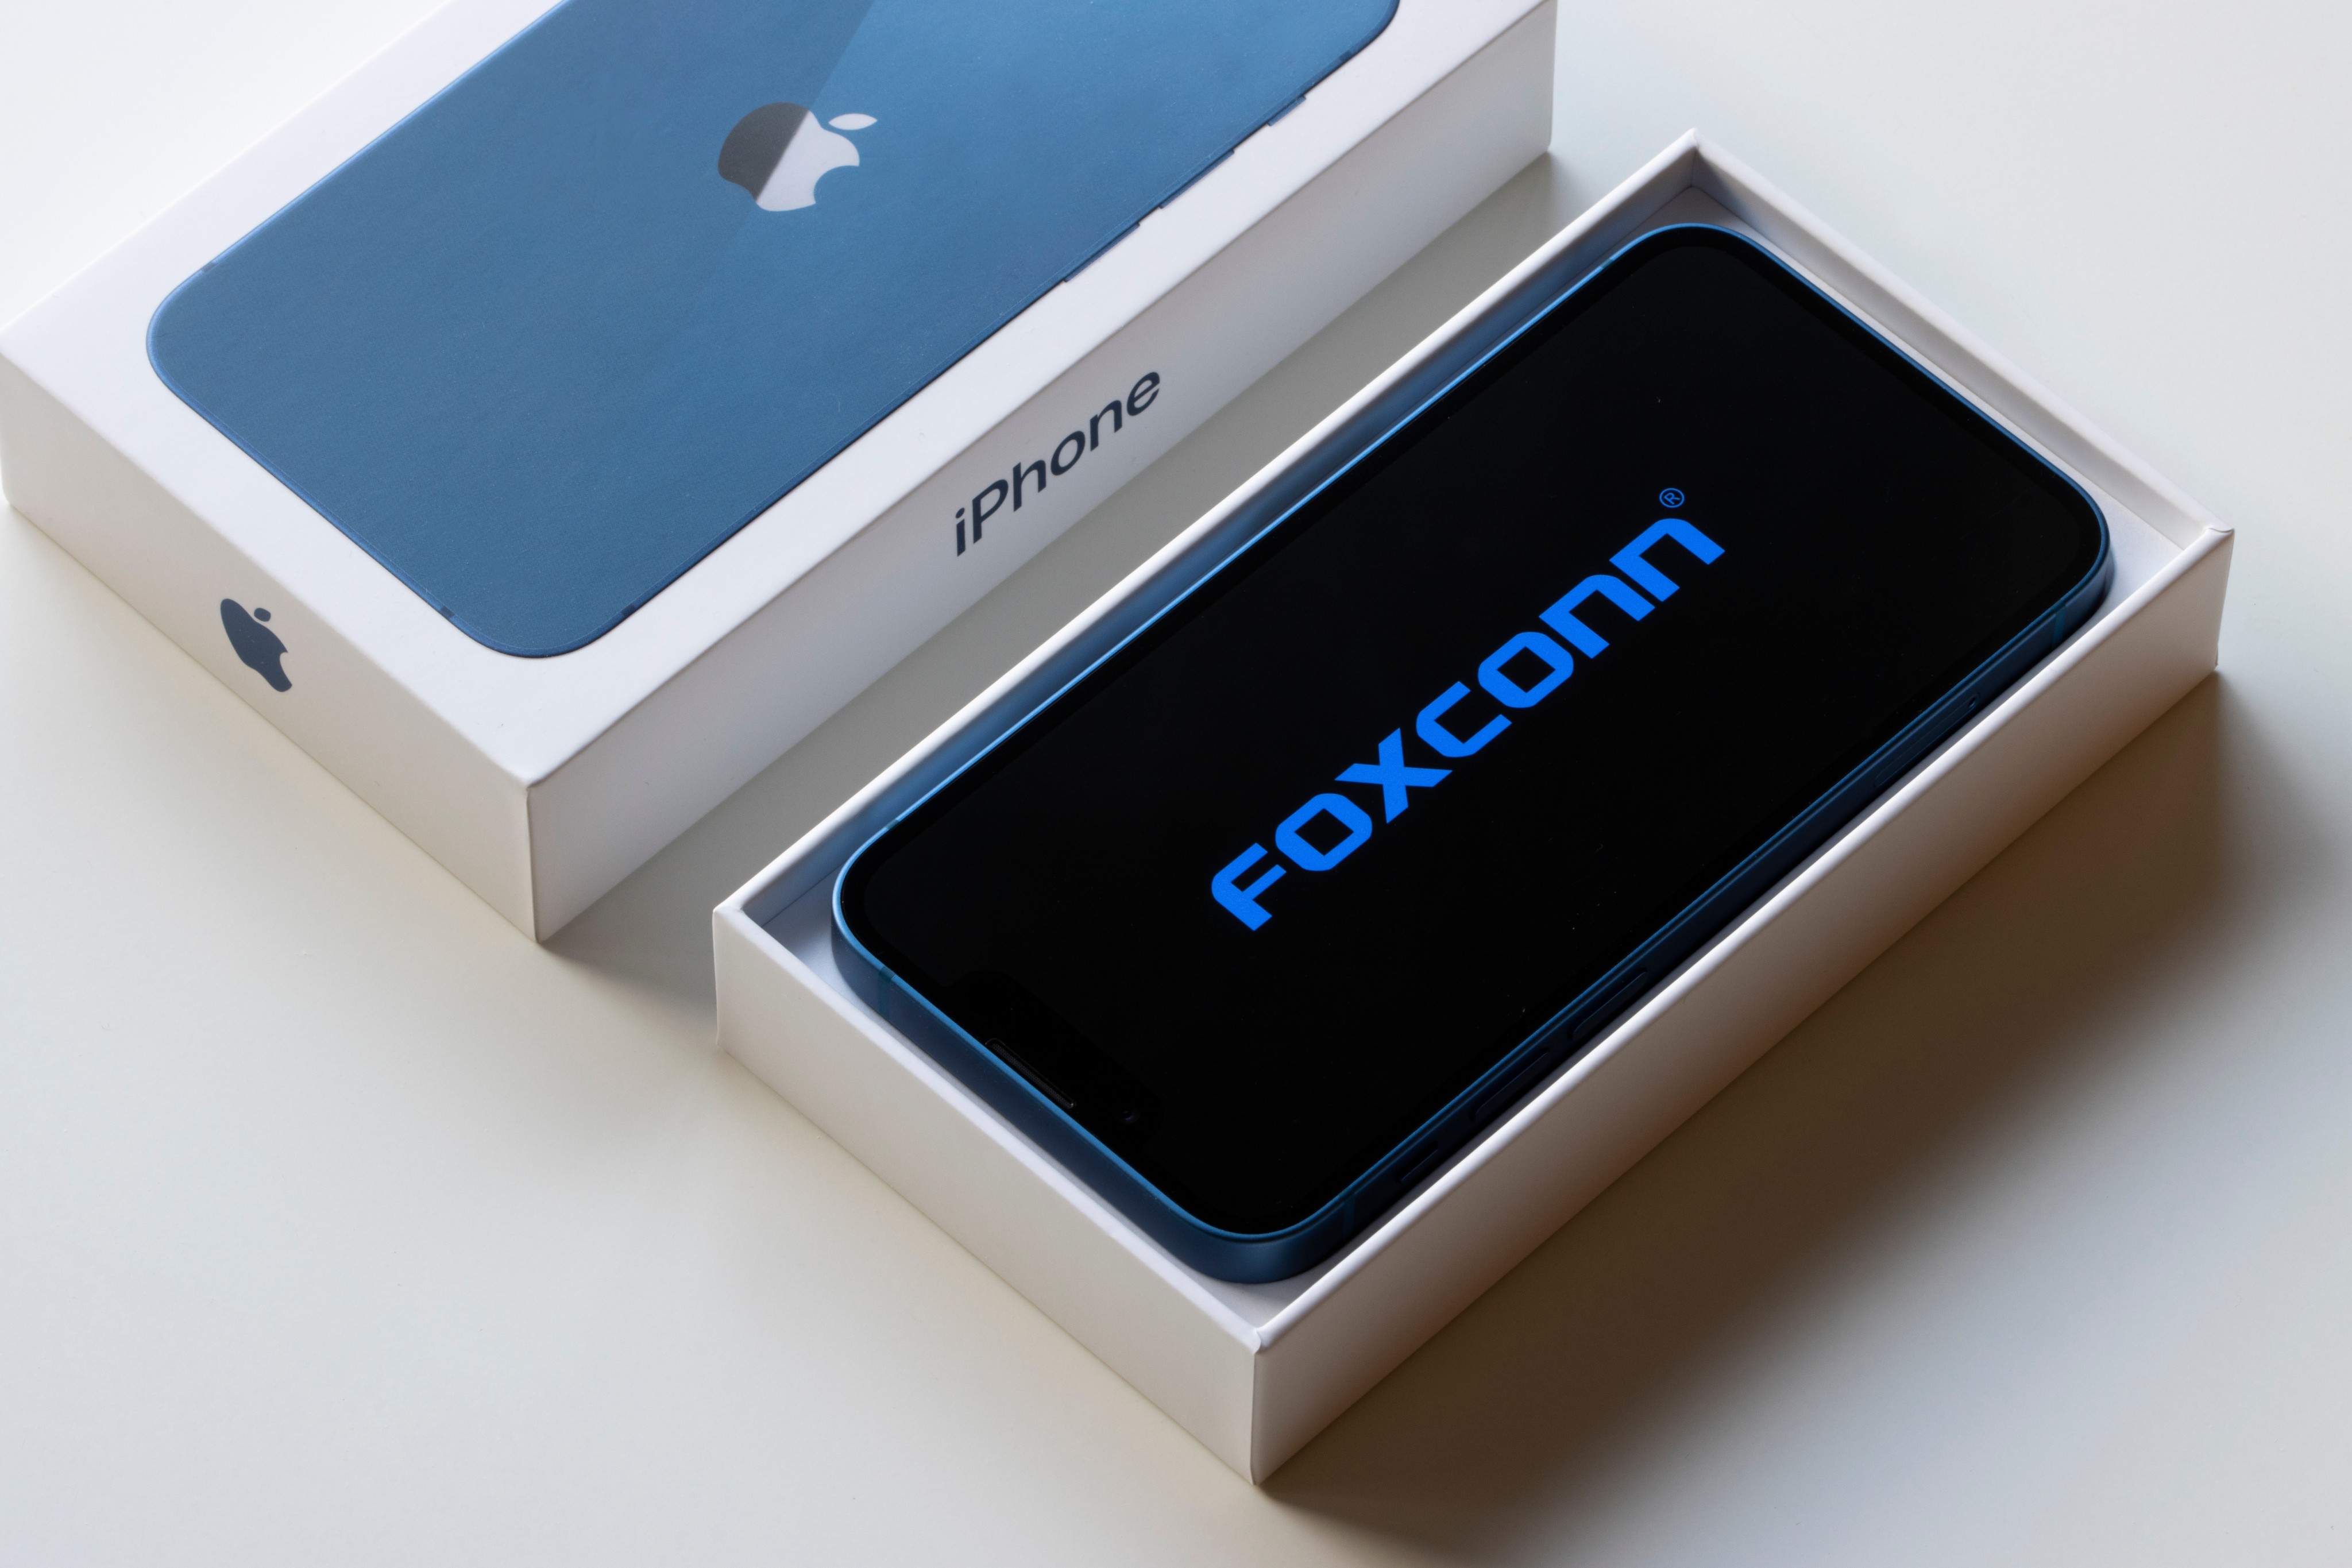 Foxconn Technology Group’s dim first-quarter outlook reflects concerns raised by investors of major client Apple about sluggish iPhone sales. Photo: Shutterstock